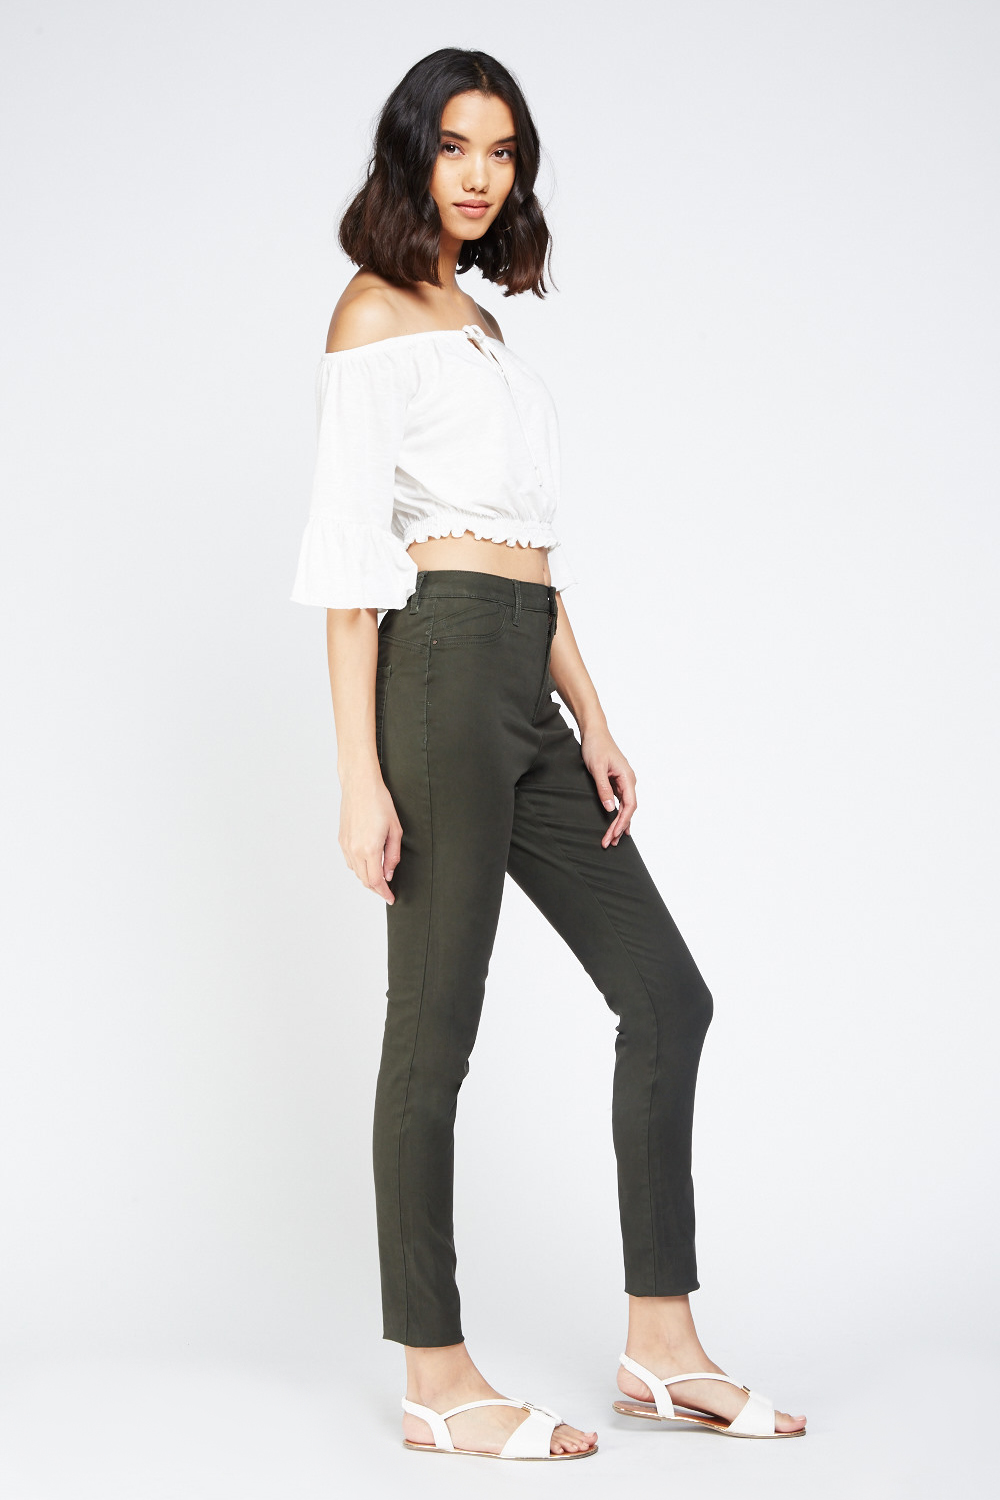 Low Waist Skinny Fit Trousers - Just $3